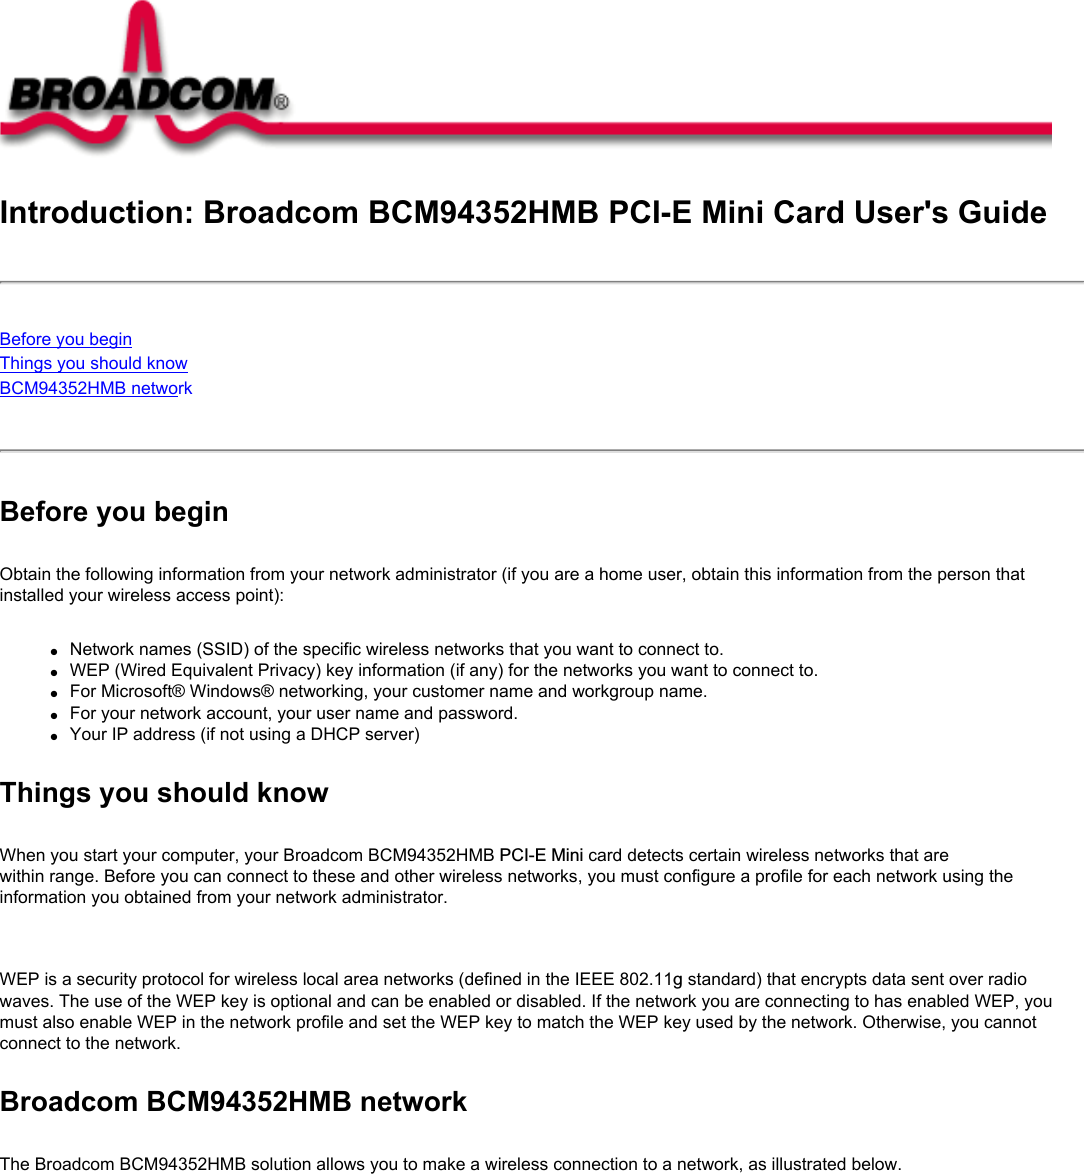 Introduction: Broadcom BCM94352HMB PCI-E Mini Card User&apos;s GuideBefore you beginThings you should knowBCM94352HMB network Before you beginObtain the following information from your network administrator (if you are a home user, obtain this information from the person that installed your wireless access point):●     Network names (SSID) of the specific wireless networks that you want to connect to.●     WEP (Wired Equivalent Privacy) key information (if any) for the networks you want to connect to.●     For Microsoft® Windows® networking, your customer name and workgroup name.●     For your network account, your user name and password.●     Your IP address (if not using a DHCP server)Things you should knowWhen you start your computer, your Broadcom BCM94352HMB PCI-E Mini card detects certain wireless networks that are within range. Before you can connect to these and other wireless networks, you must configure a profile for each network using the information you obtained from your network administrator.   WEP is a security protocol for wireless local area networks (defined in the IEEE 802.11g standard) that encrypts data sent over radio waves. The use of the WEP key is optional and can be enabled or disabled. If the network you are connecting to has enabled WEP, you must also enable WEP in the network profile and set the WEP key to match the WEP key used by the network. Otherwise, you cannot connect to the network.Broadcom BCM94352HMB networkThe Broadcom BCM94352HMB solution allows you to make a wireless connection to a network, as illustrated below.